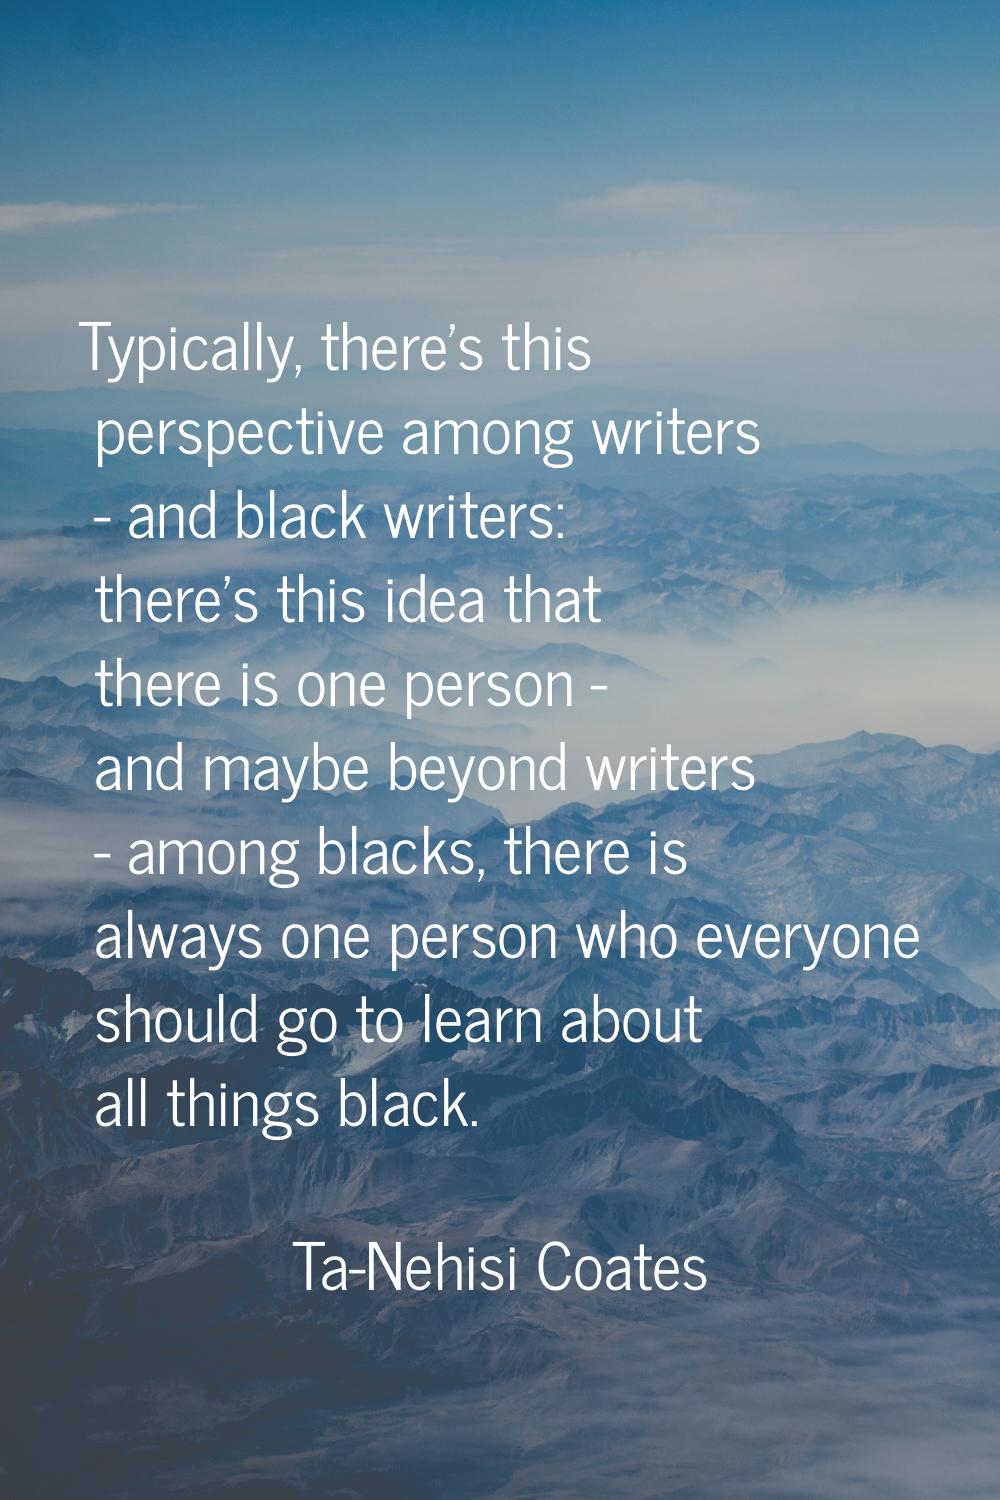 Typically, there's this perspective among writers - and black writers: there's this idea that there